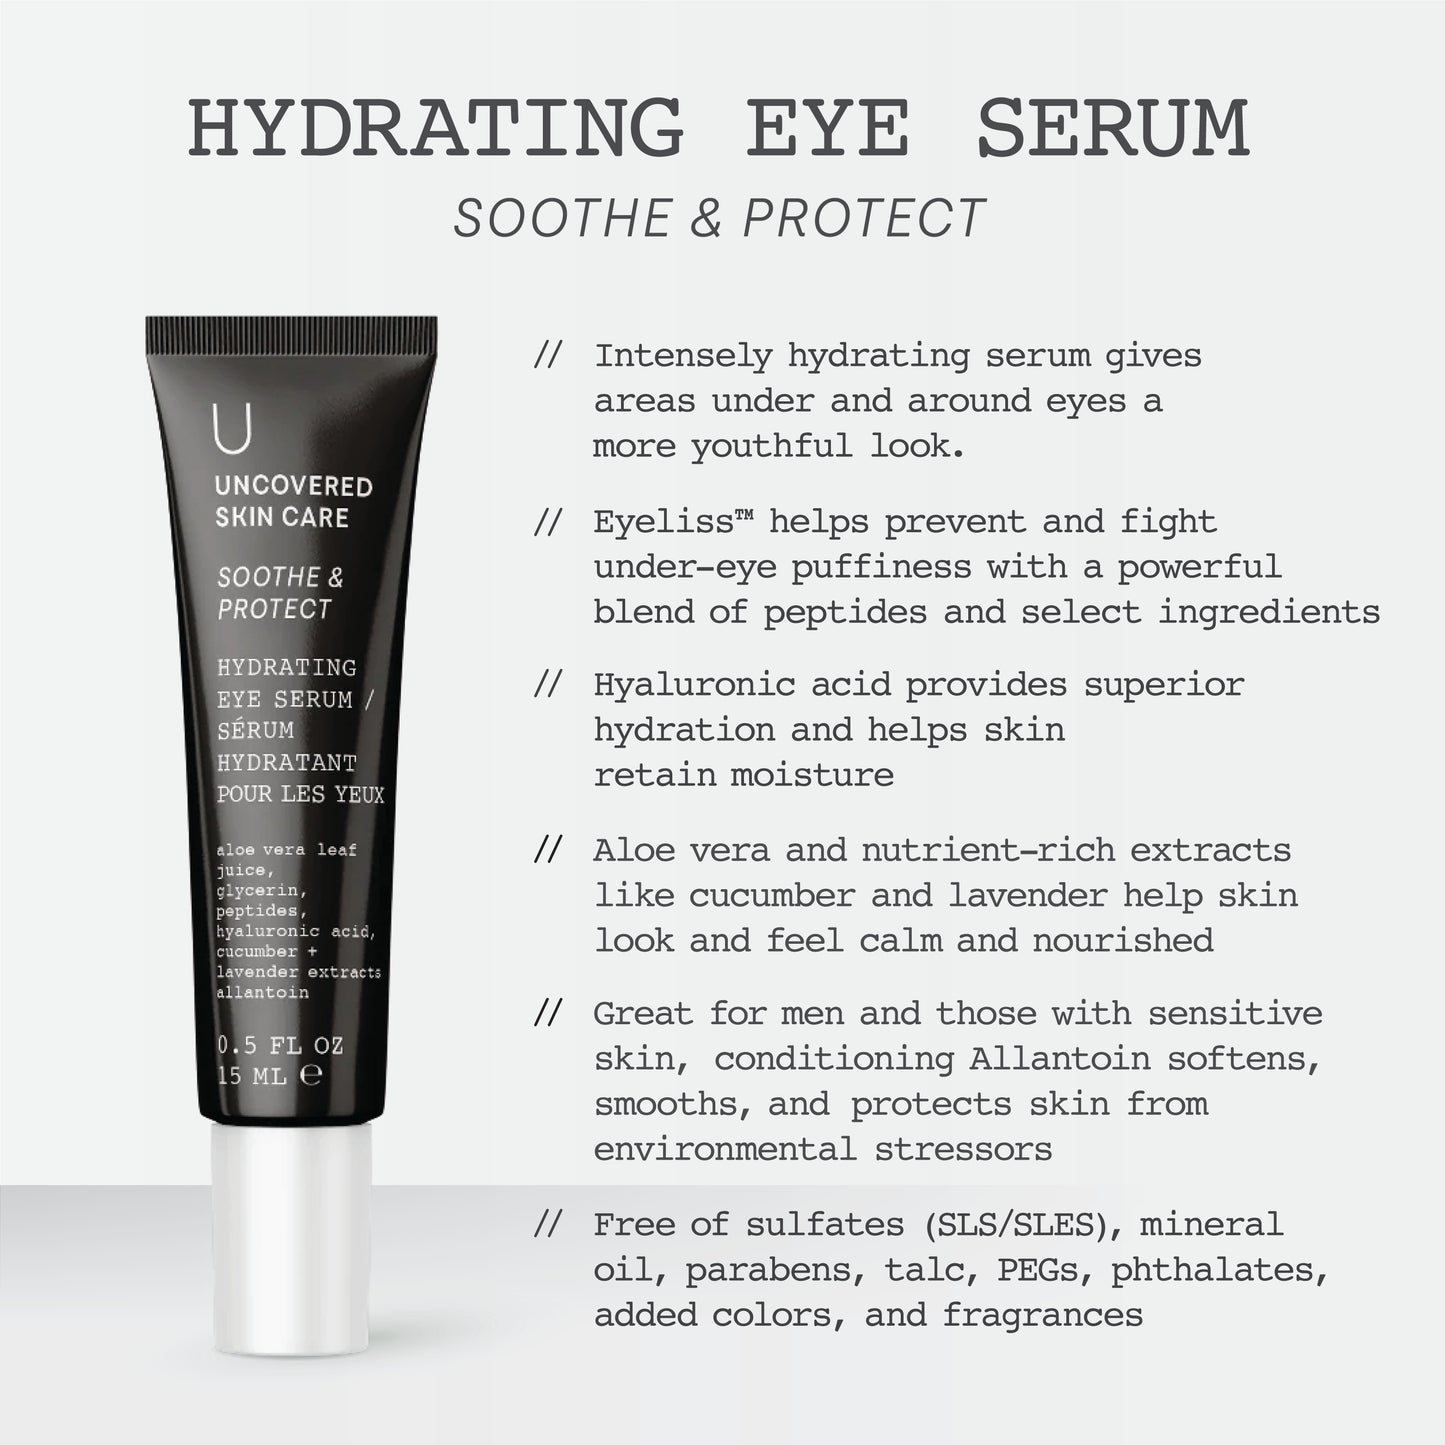 Hydrating Eye Serum - Soothe & Protect